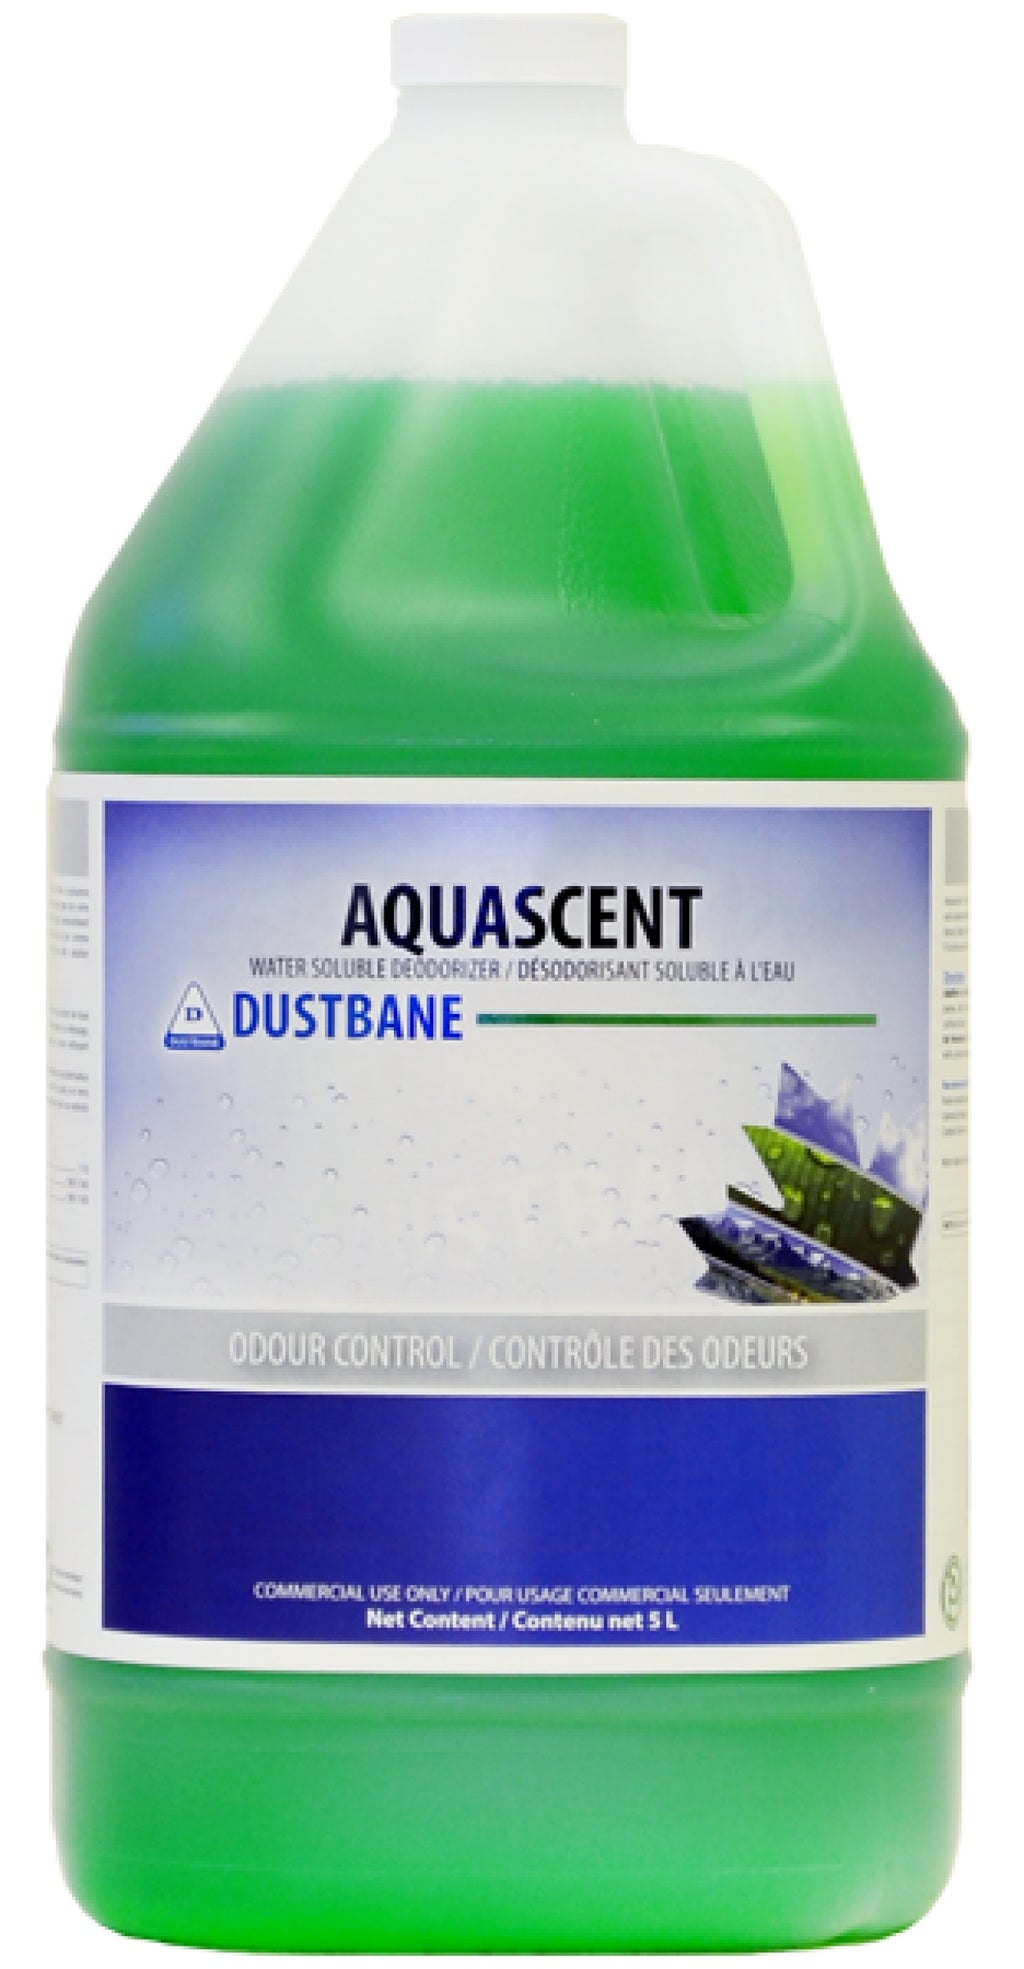 5L DUSTBANE® AQUASCENT™ WATER SOLUABLE DEODORIZER, CONCENTRATE